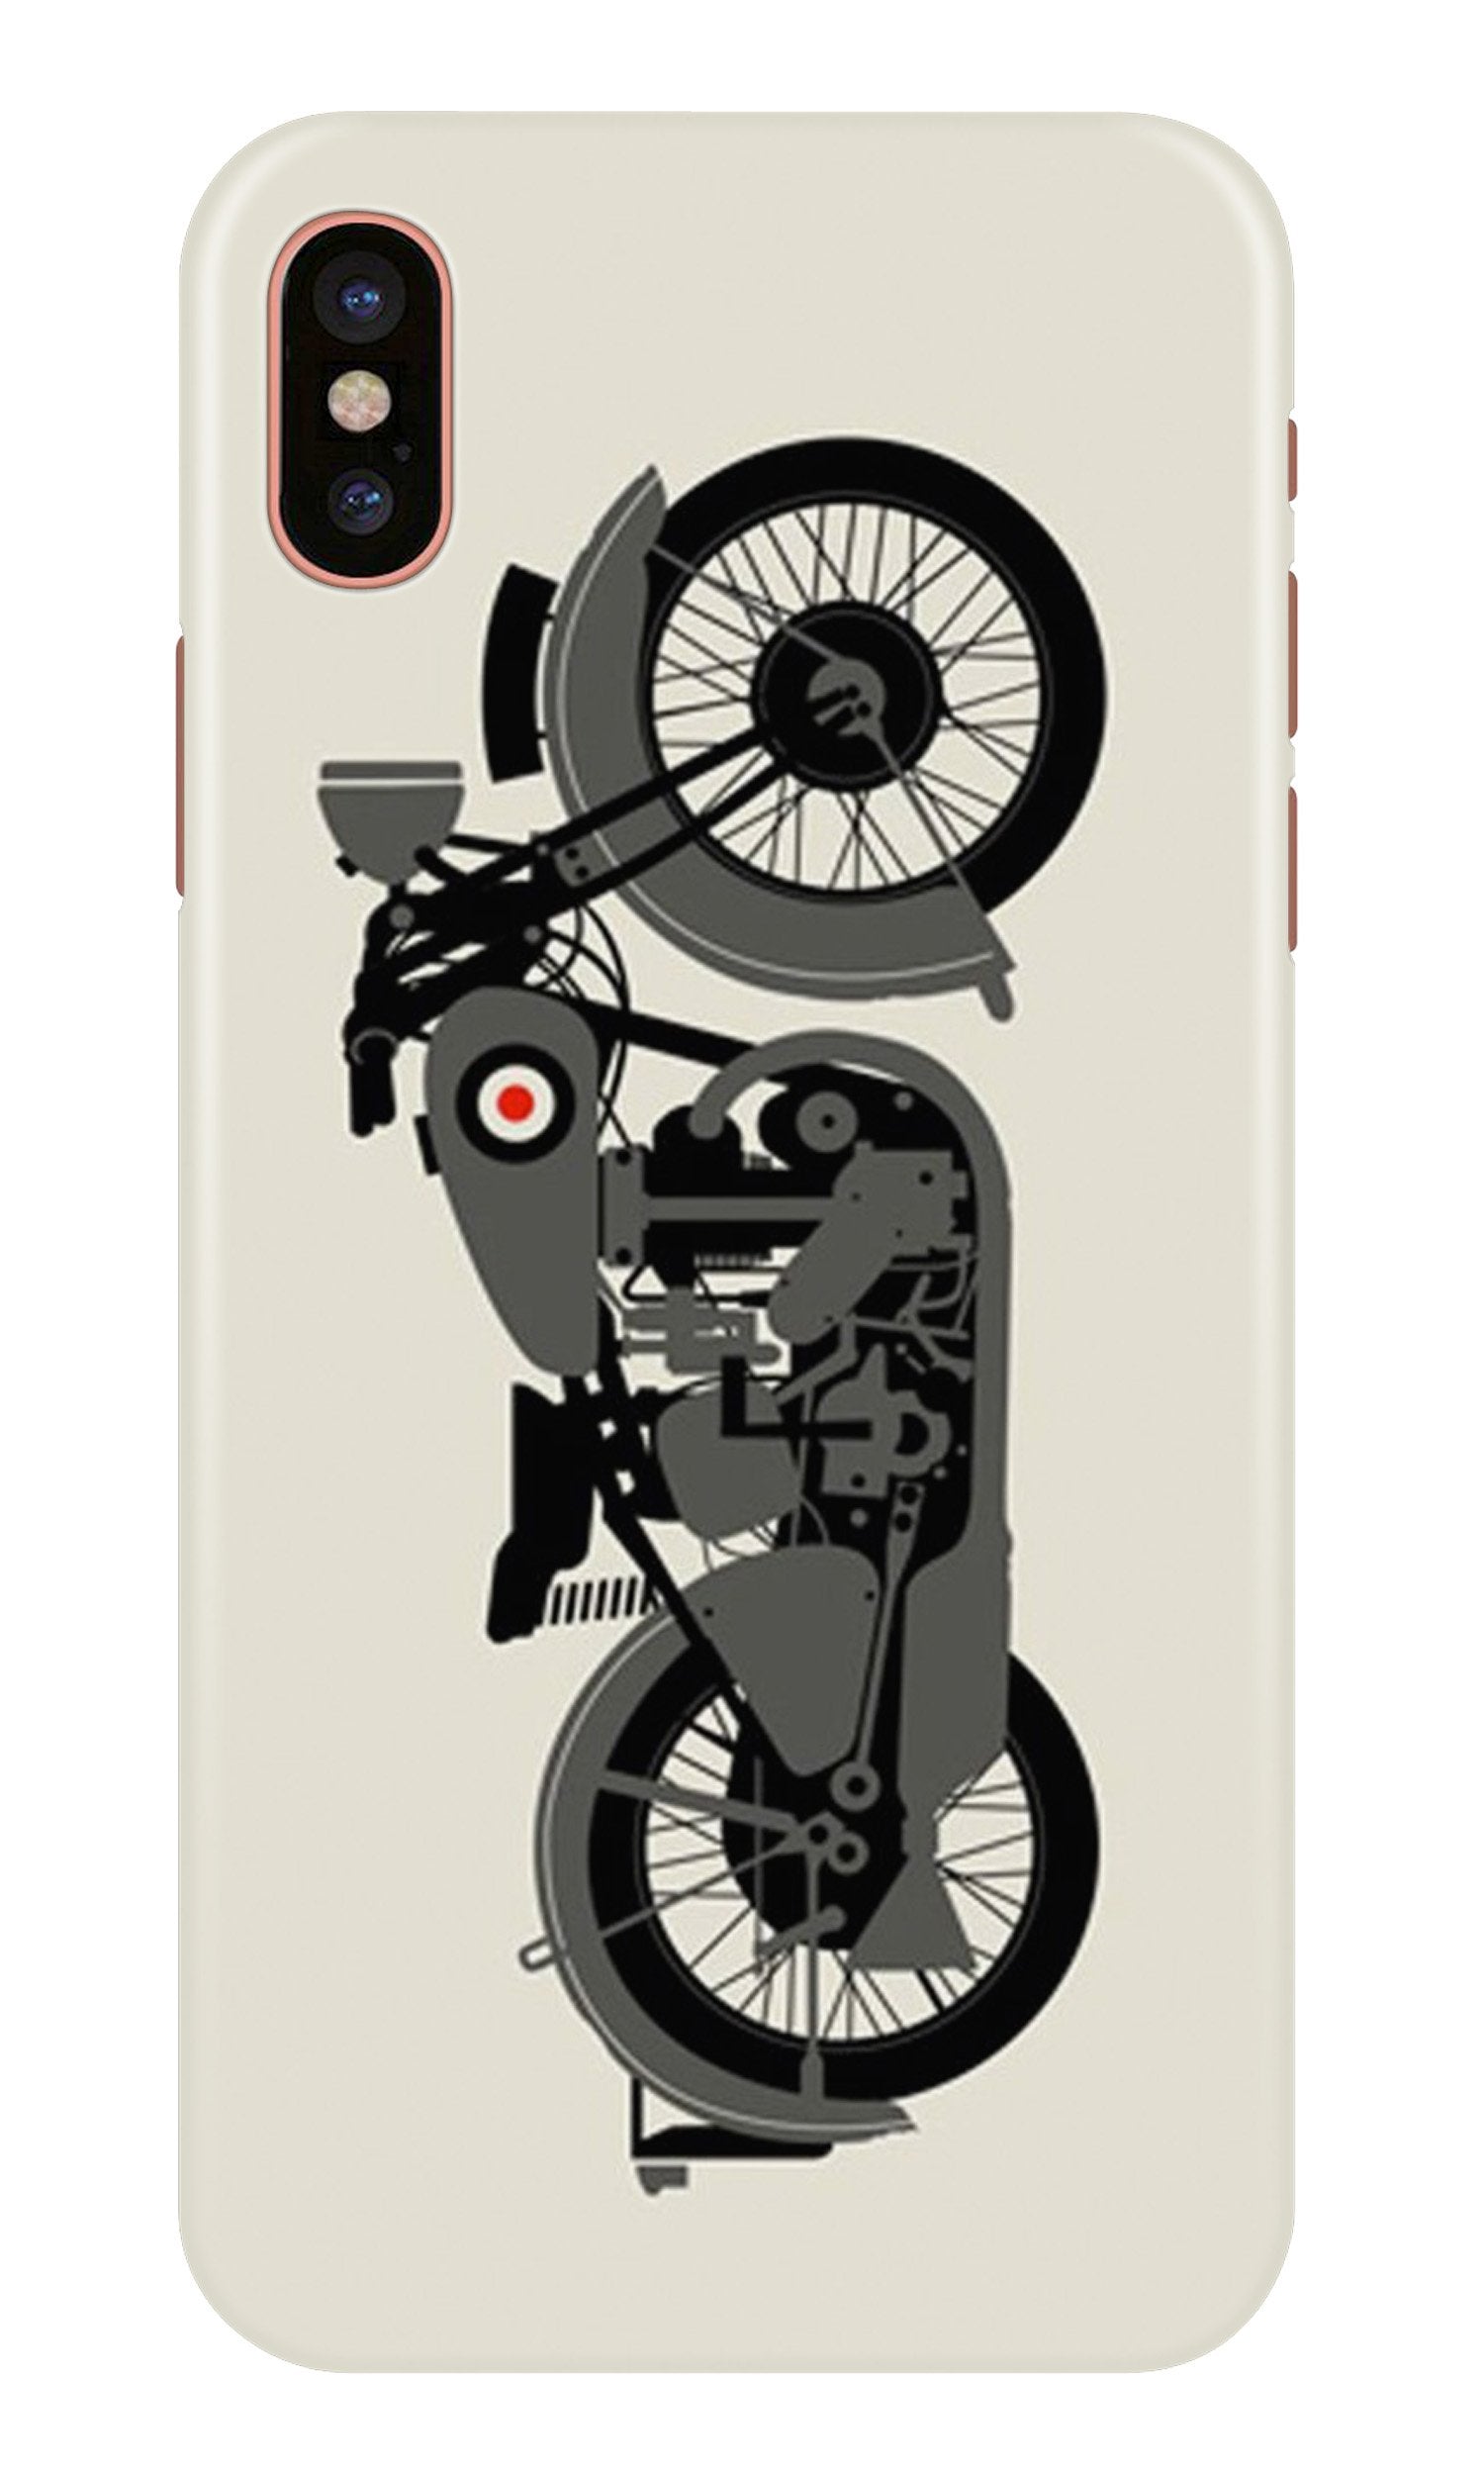 MotorCycle Case for iPhone Xr (Design No. 259)